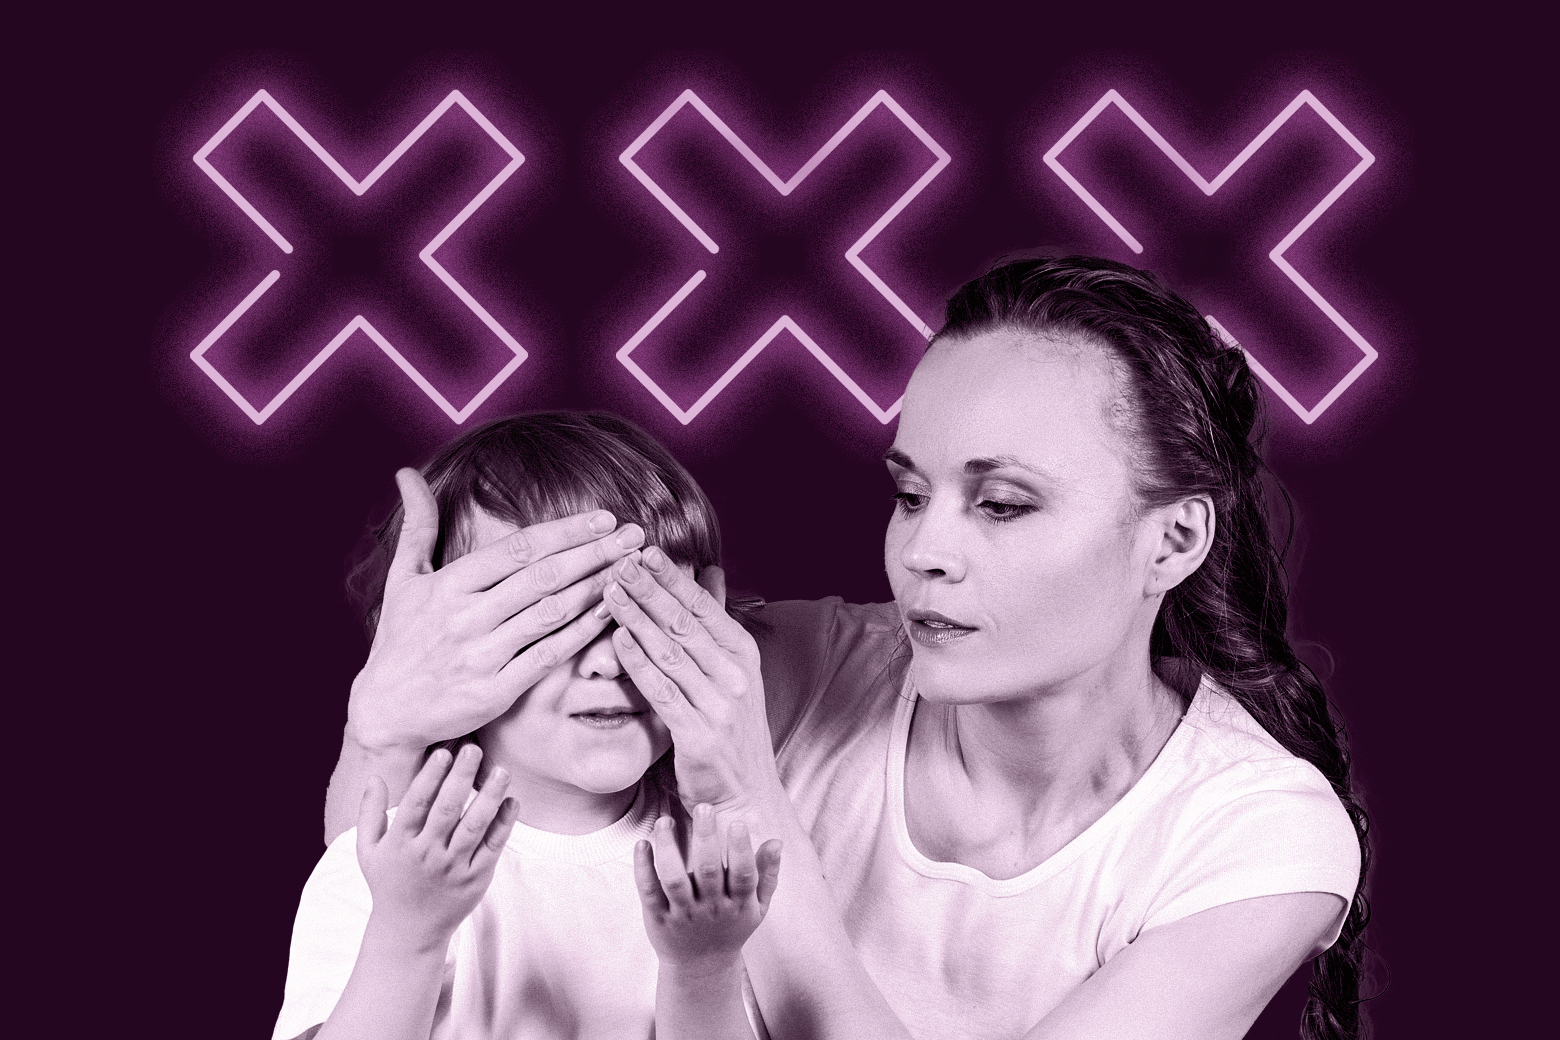 Porn addiction signs: My husband has none of them, so why do I care that he  watches it?